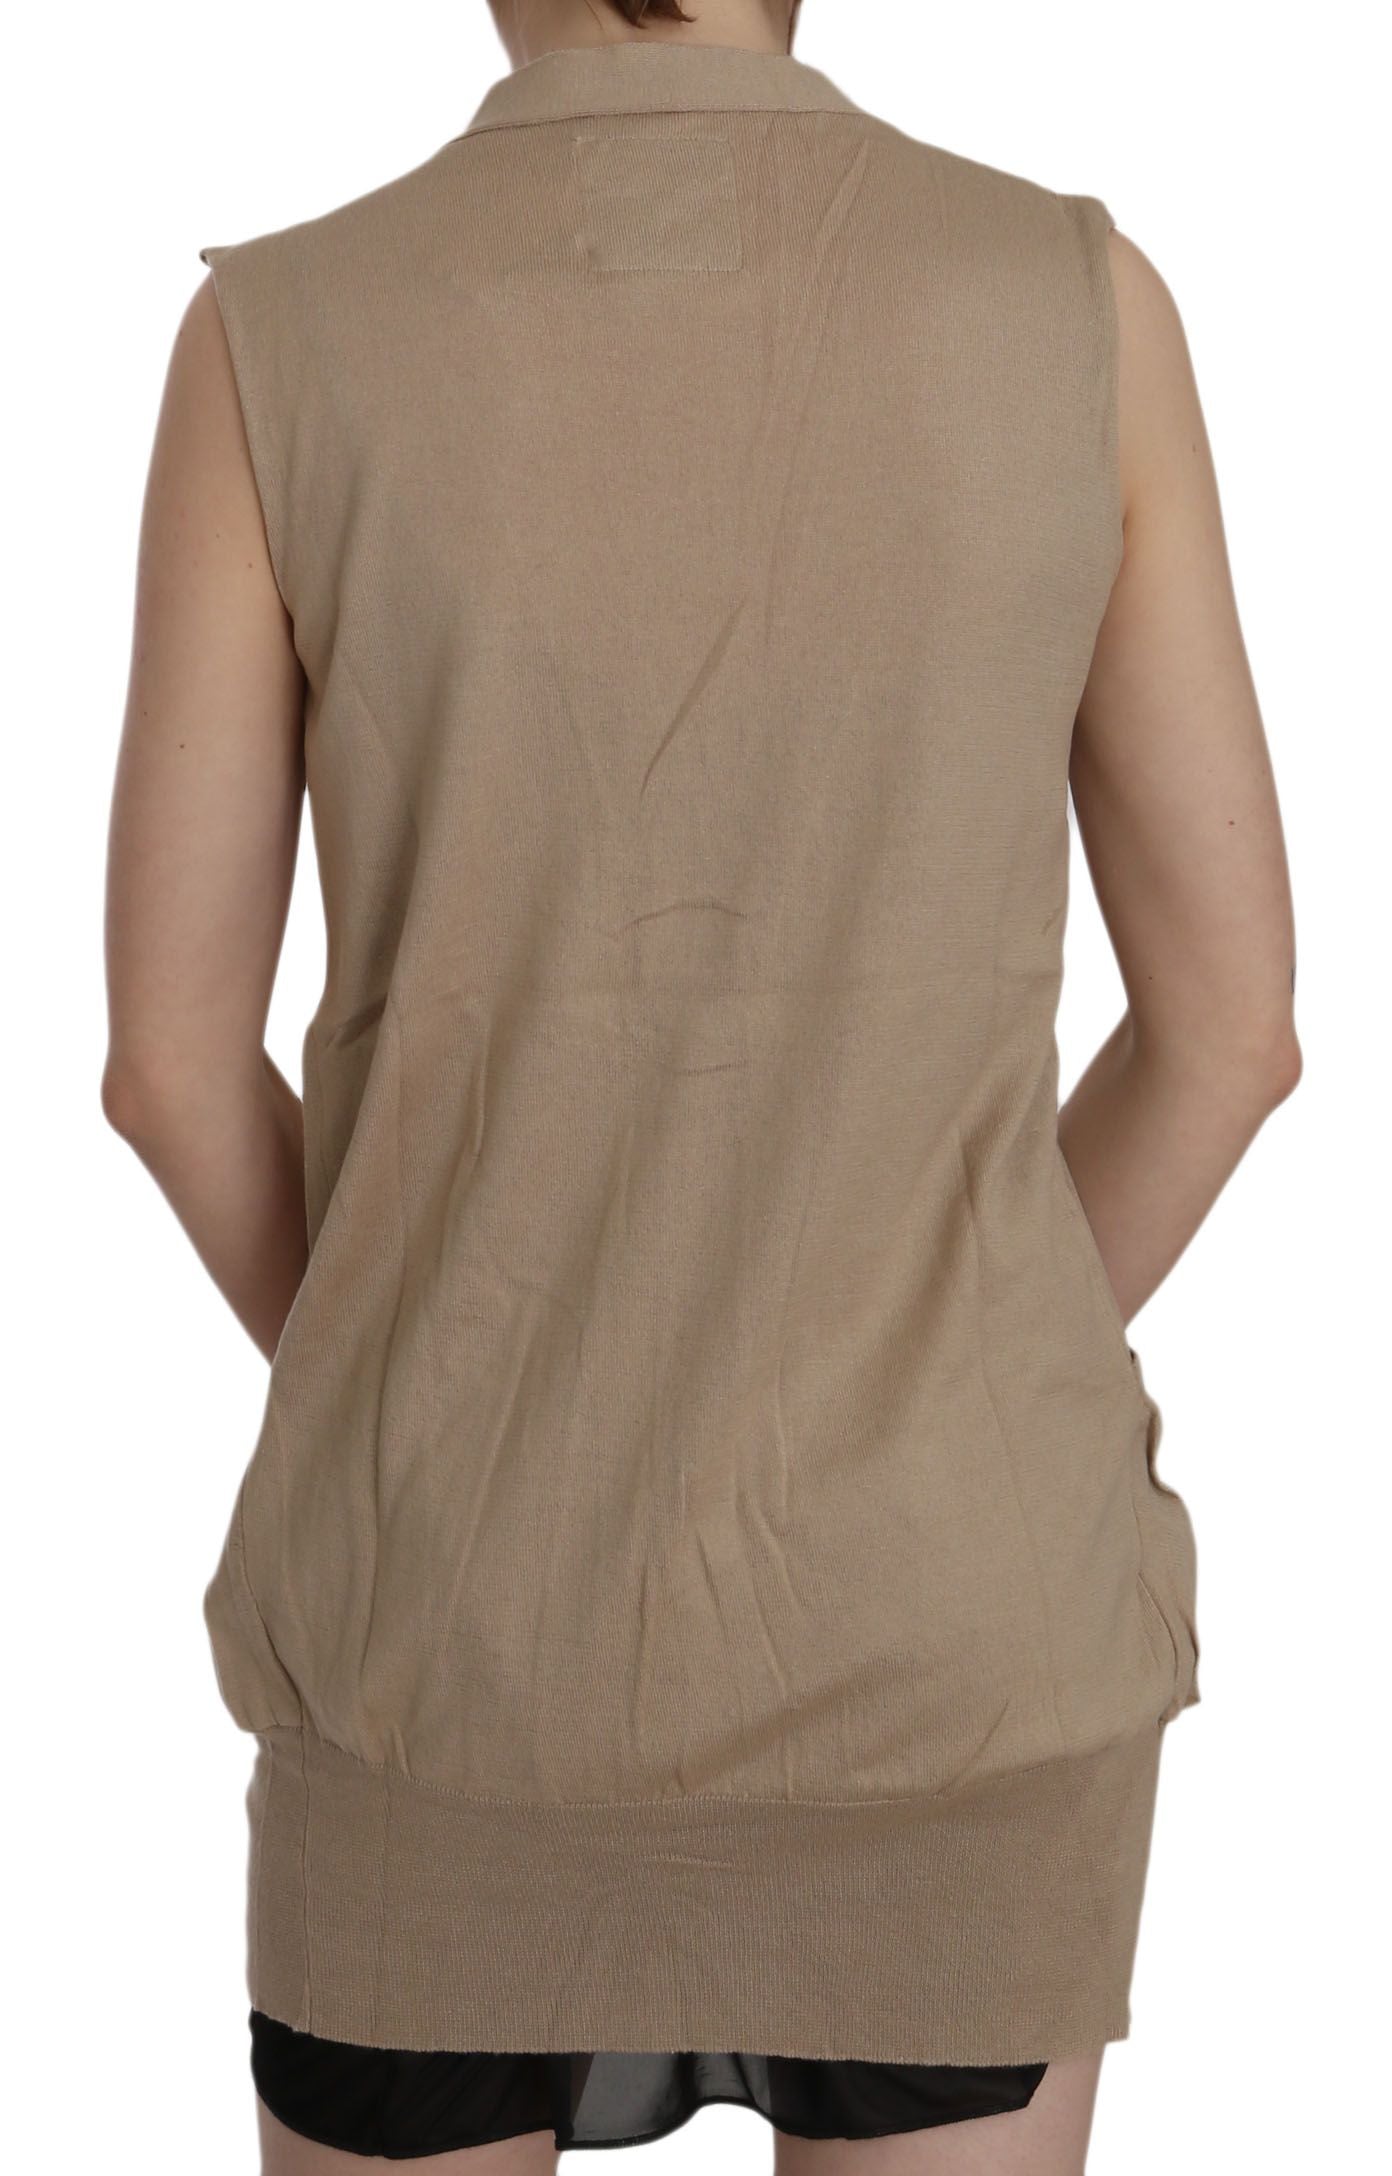 Brown 100% Cotton Sleeveless Cardigan Top Vest - Designed by PINK MEMORIES Available to Buy at a Discounted Price on Moon Behind The Hill Online Designer Discount Store